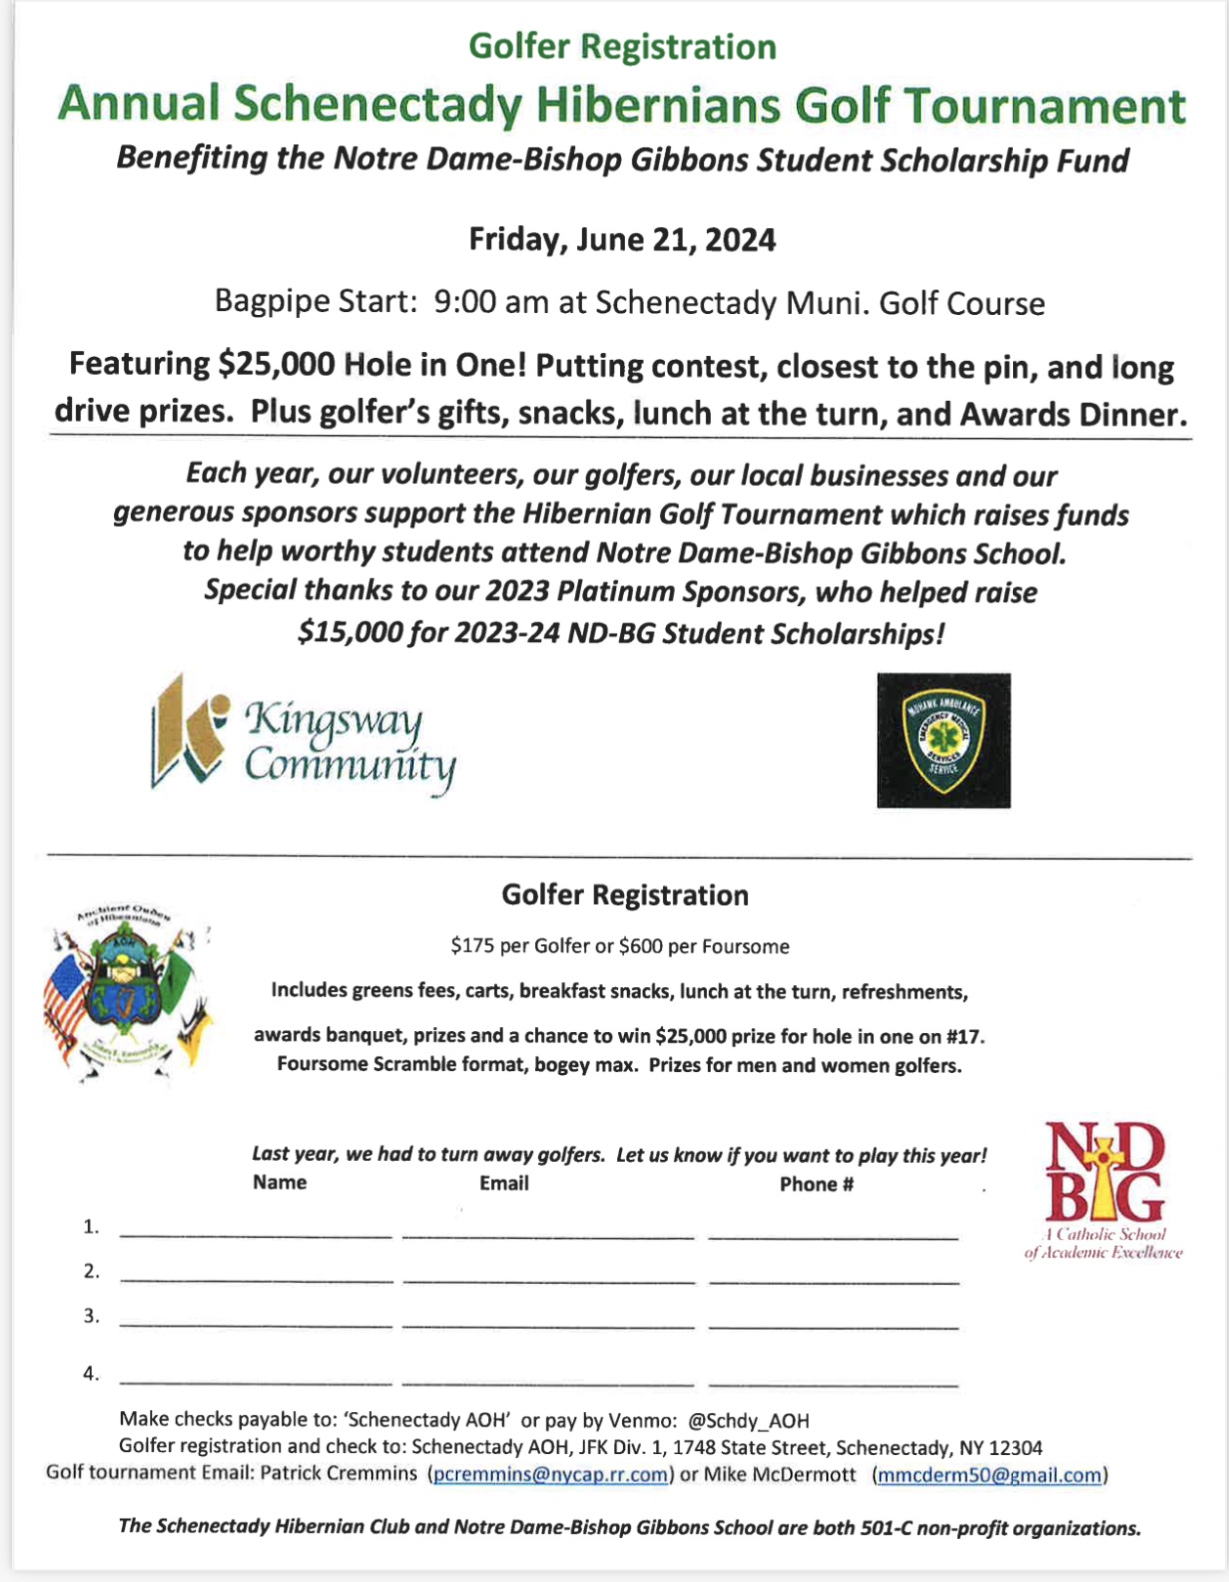 AOH Golf Tournament to Benefit NDBG Coming June 21